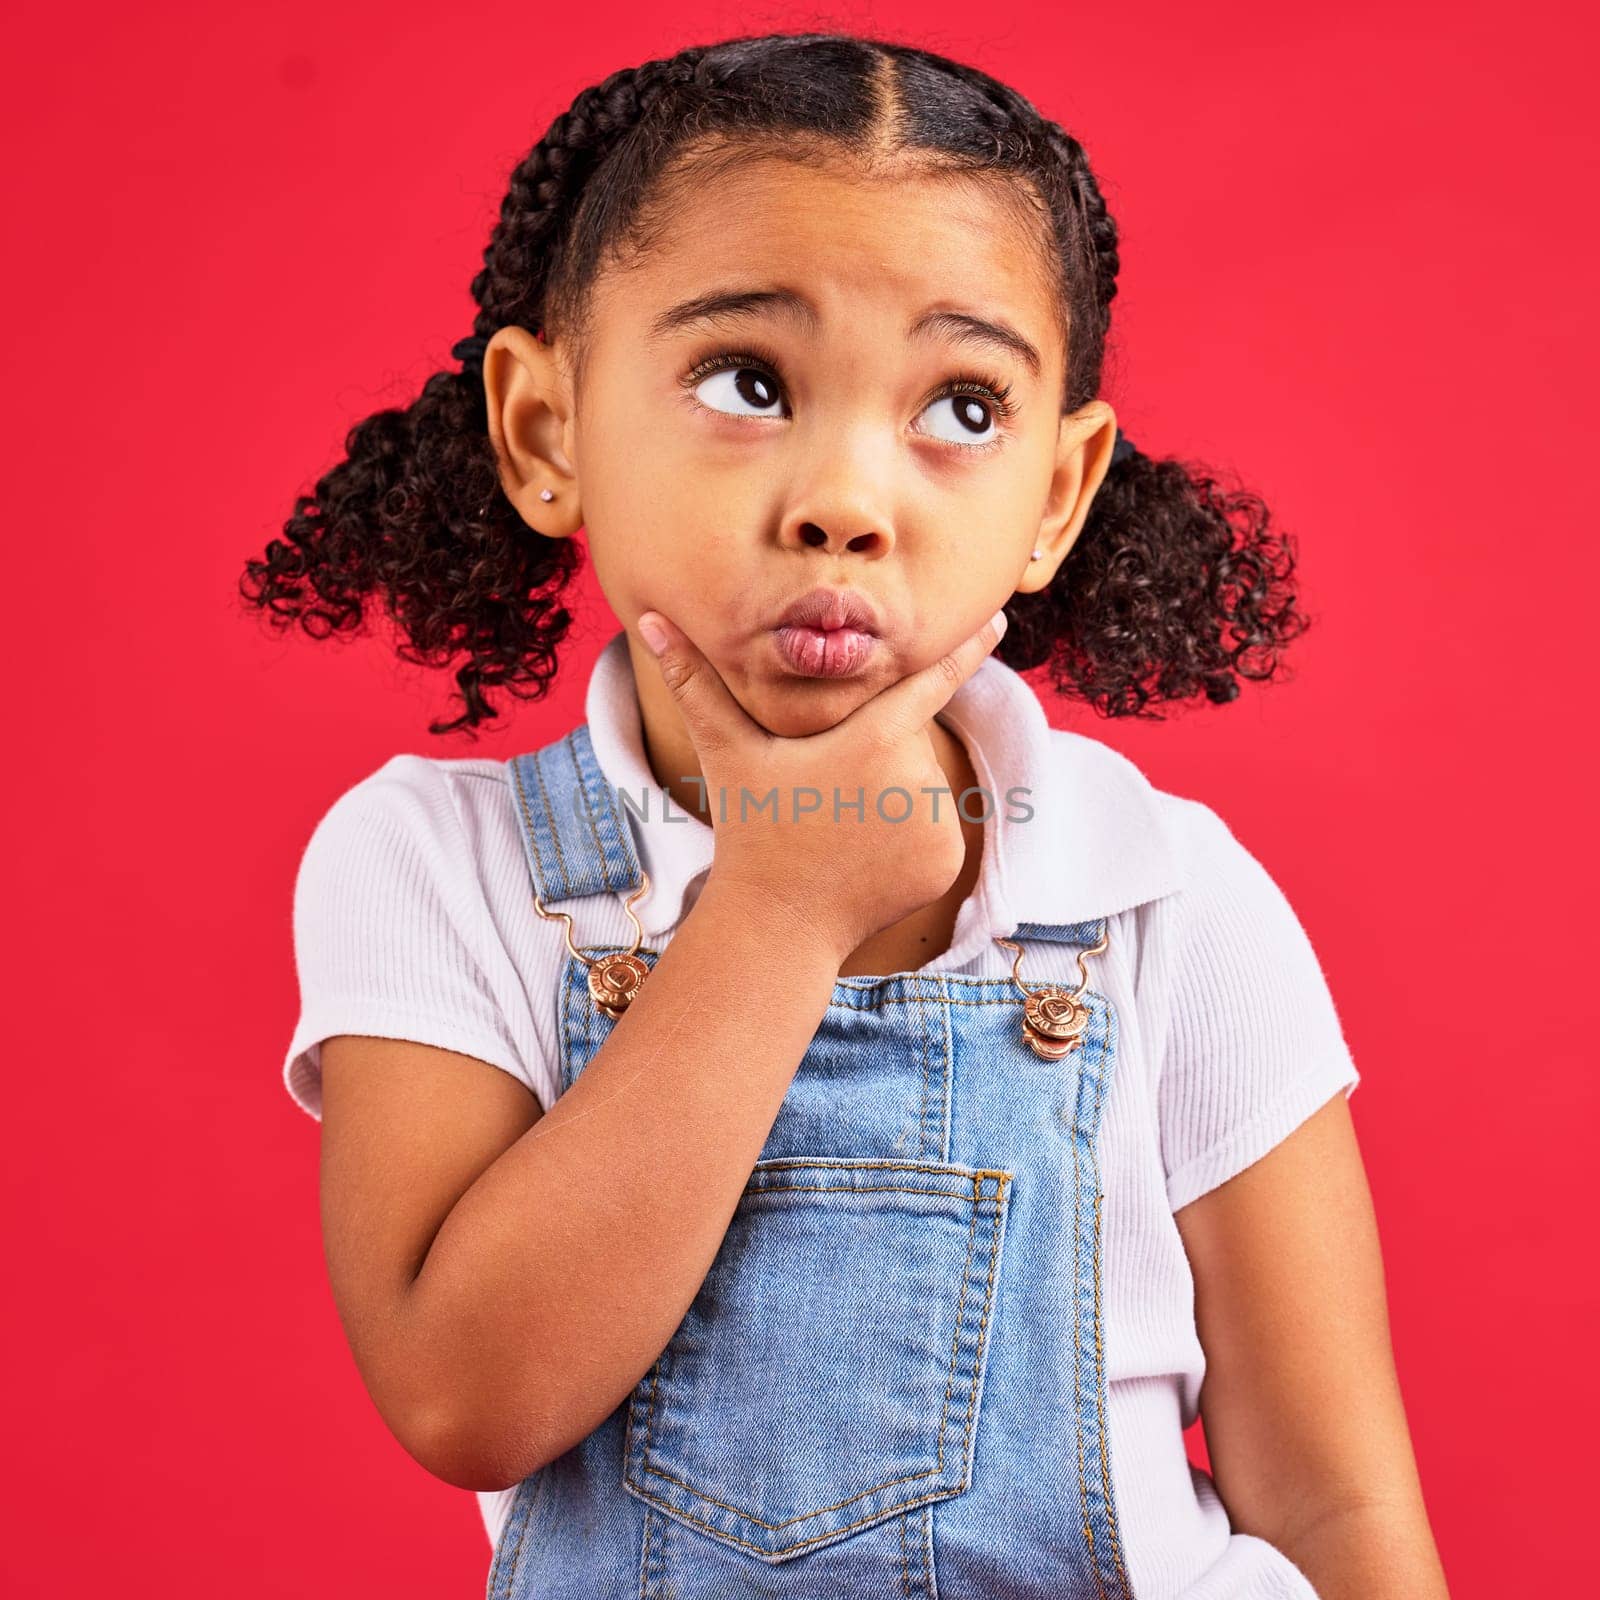 Kid, ideas or thinking face by isolated red background in games innovation, question or planning vision. Little girl, expression or curious finger on chin, children fashion clothes or curly hairstyle by YuriArcurs